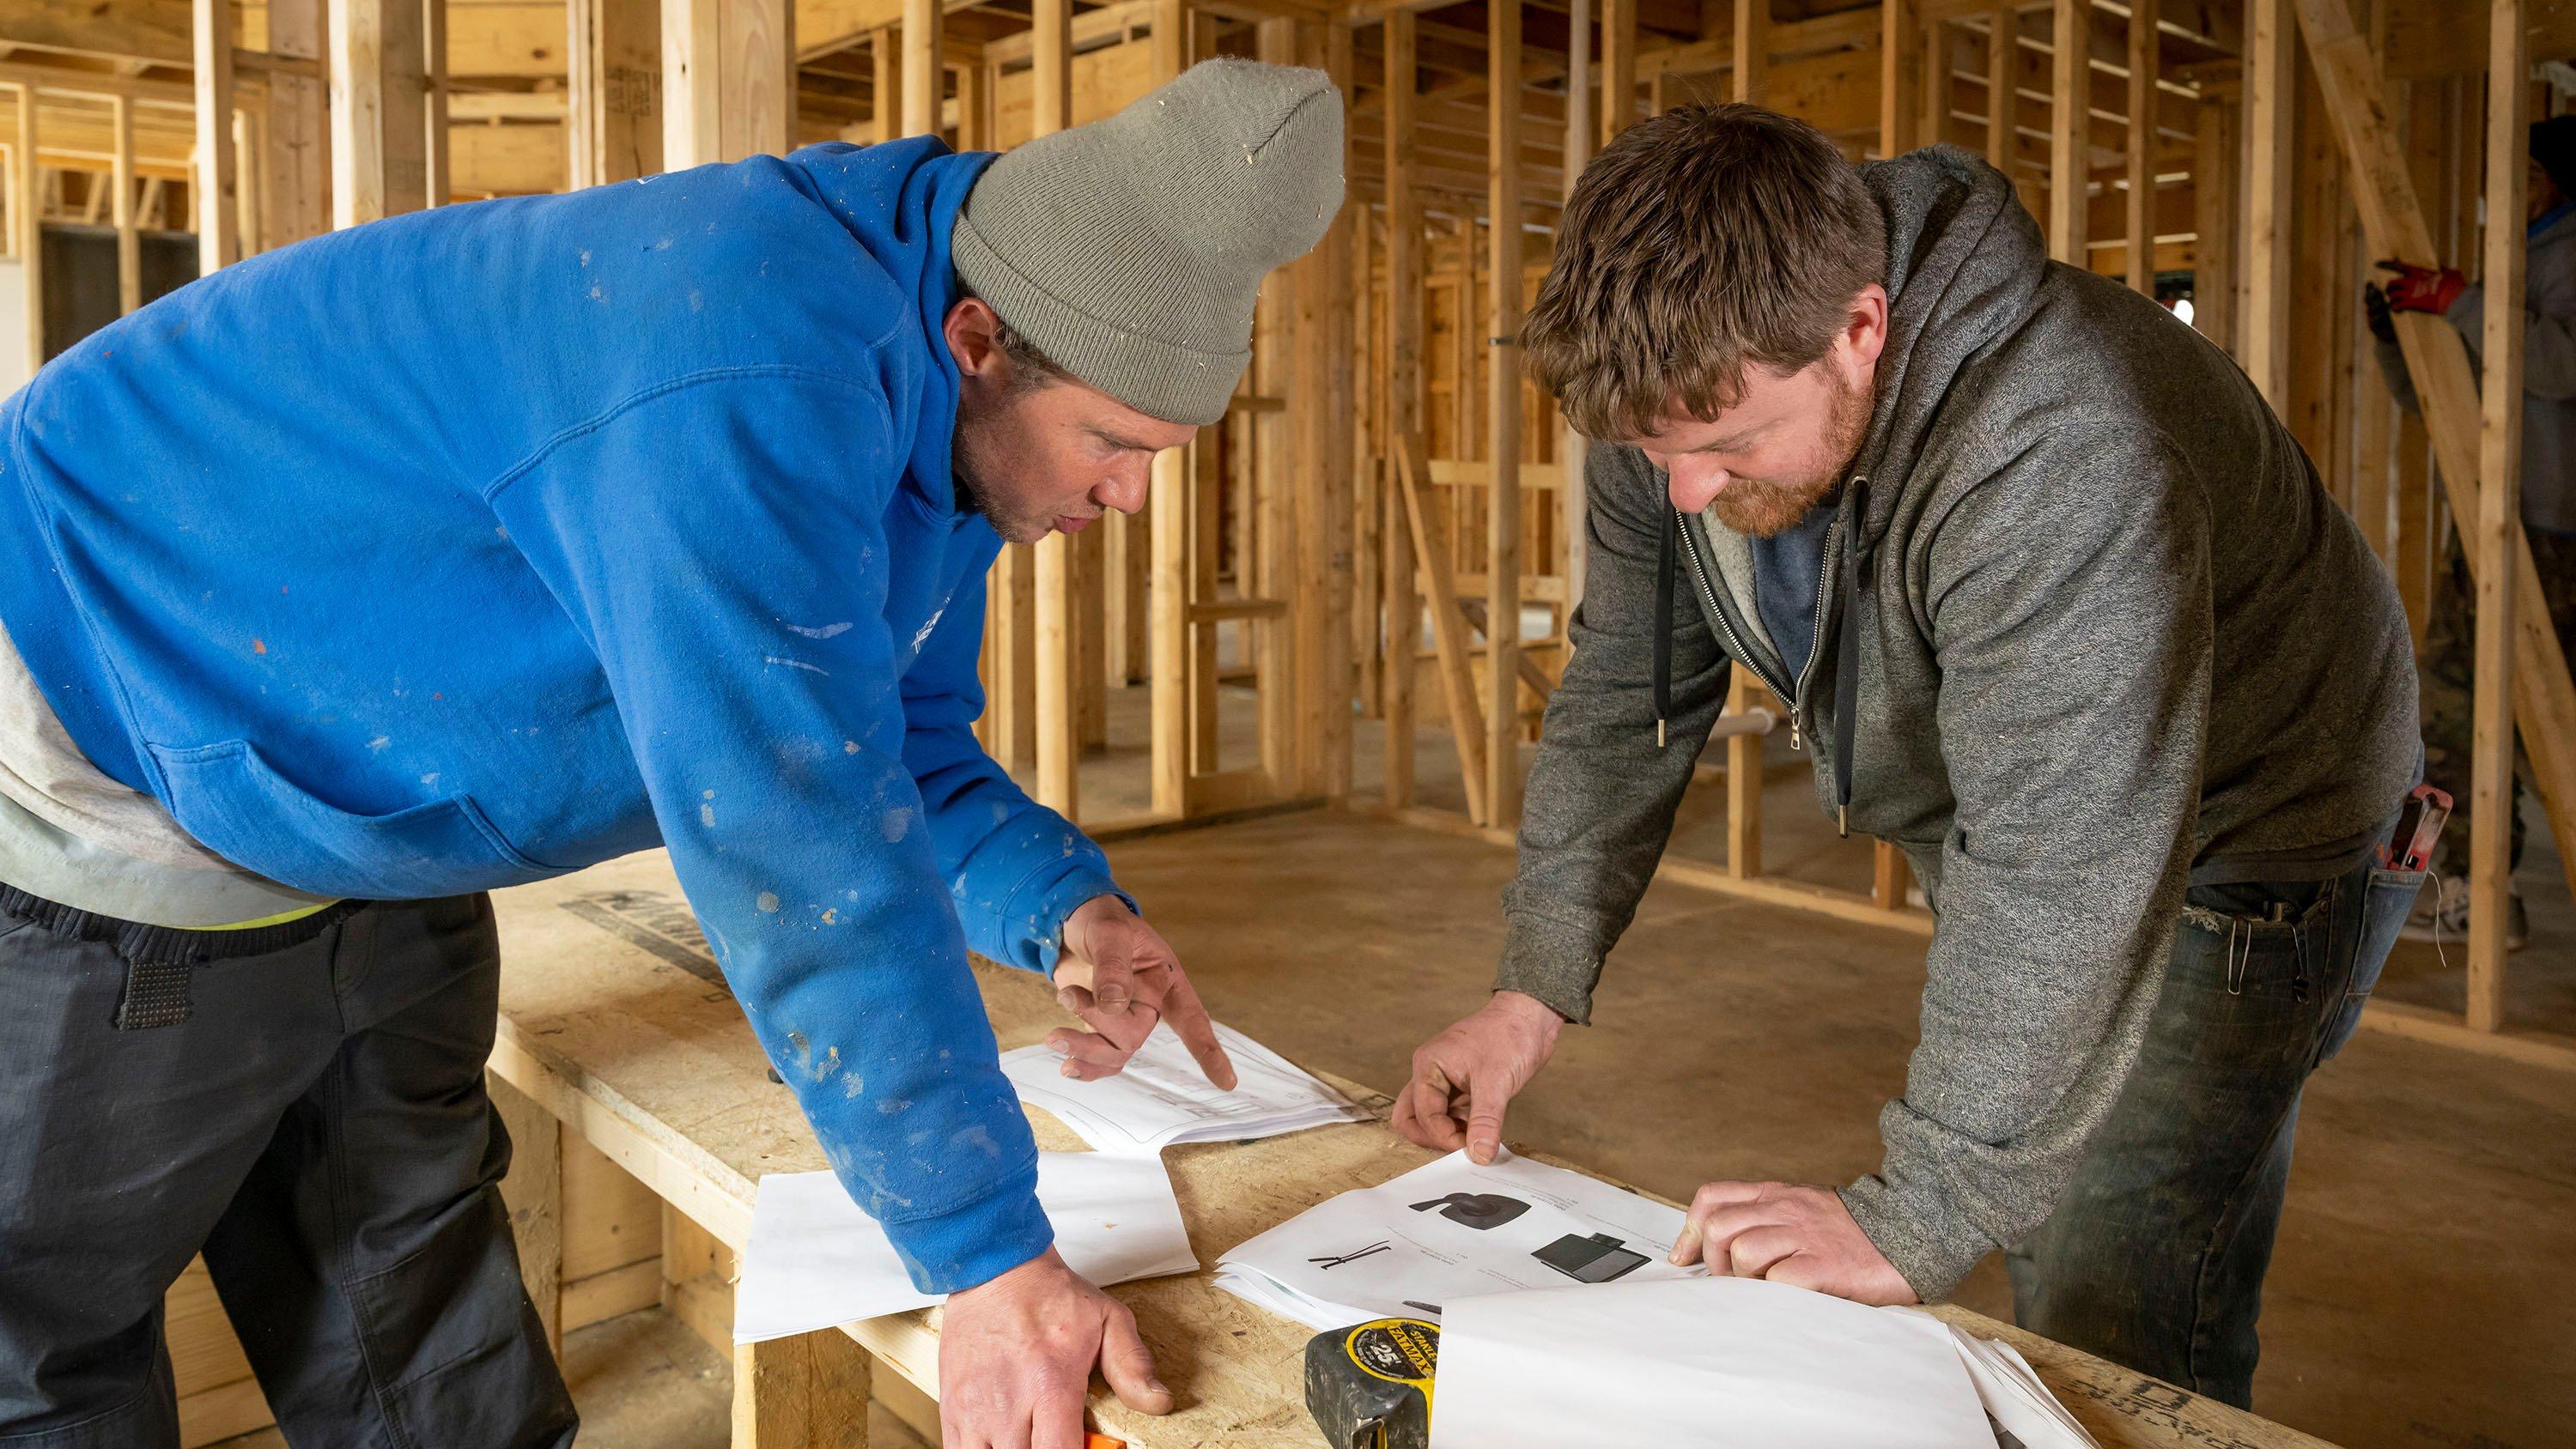 Two contractors in a residential new build discuss products.